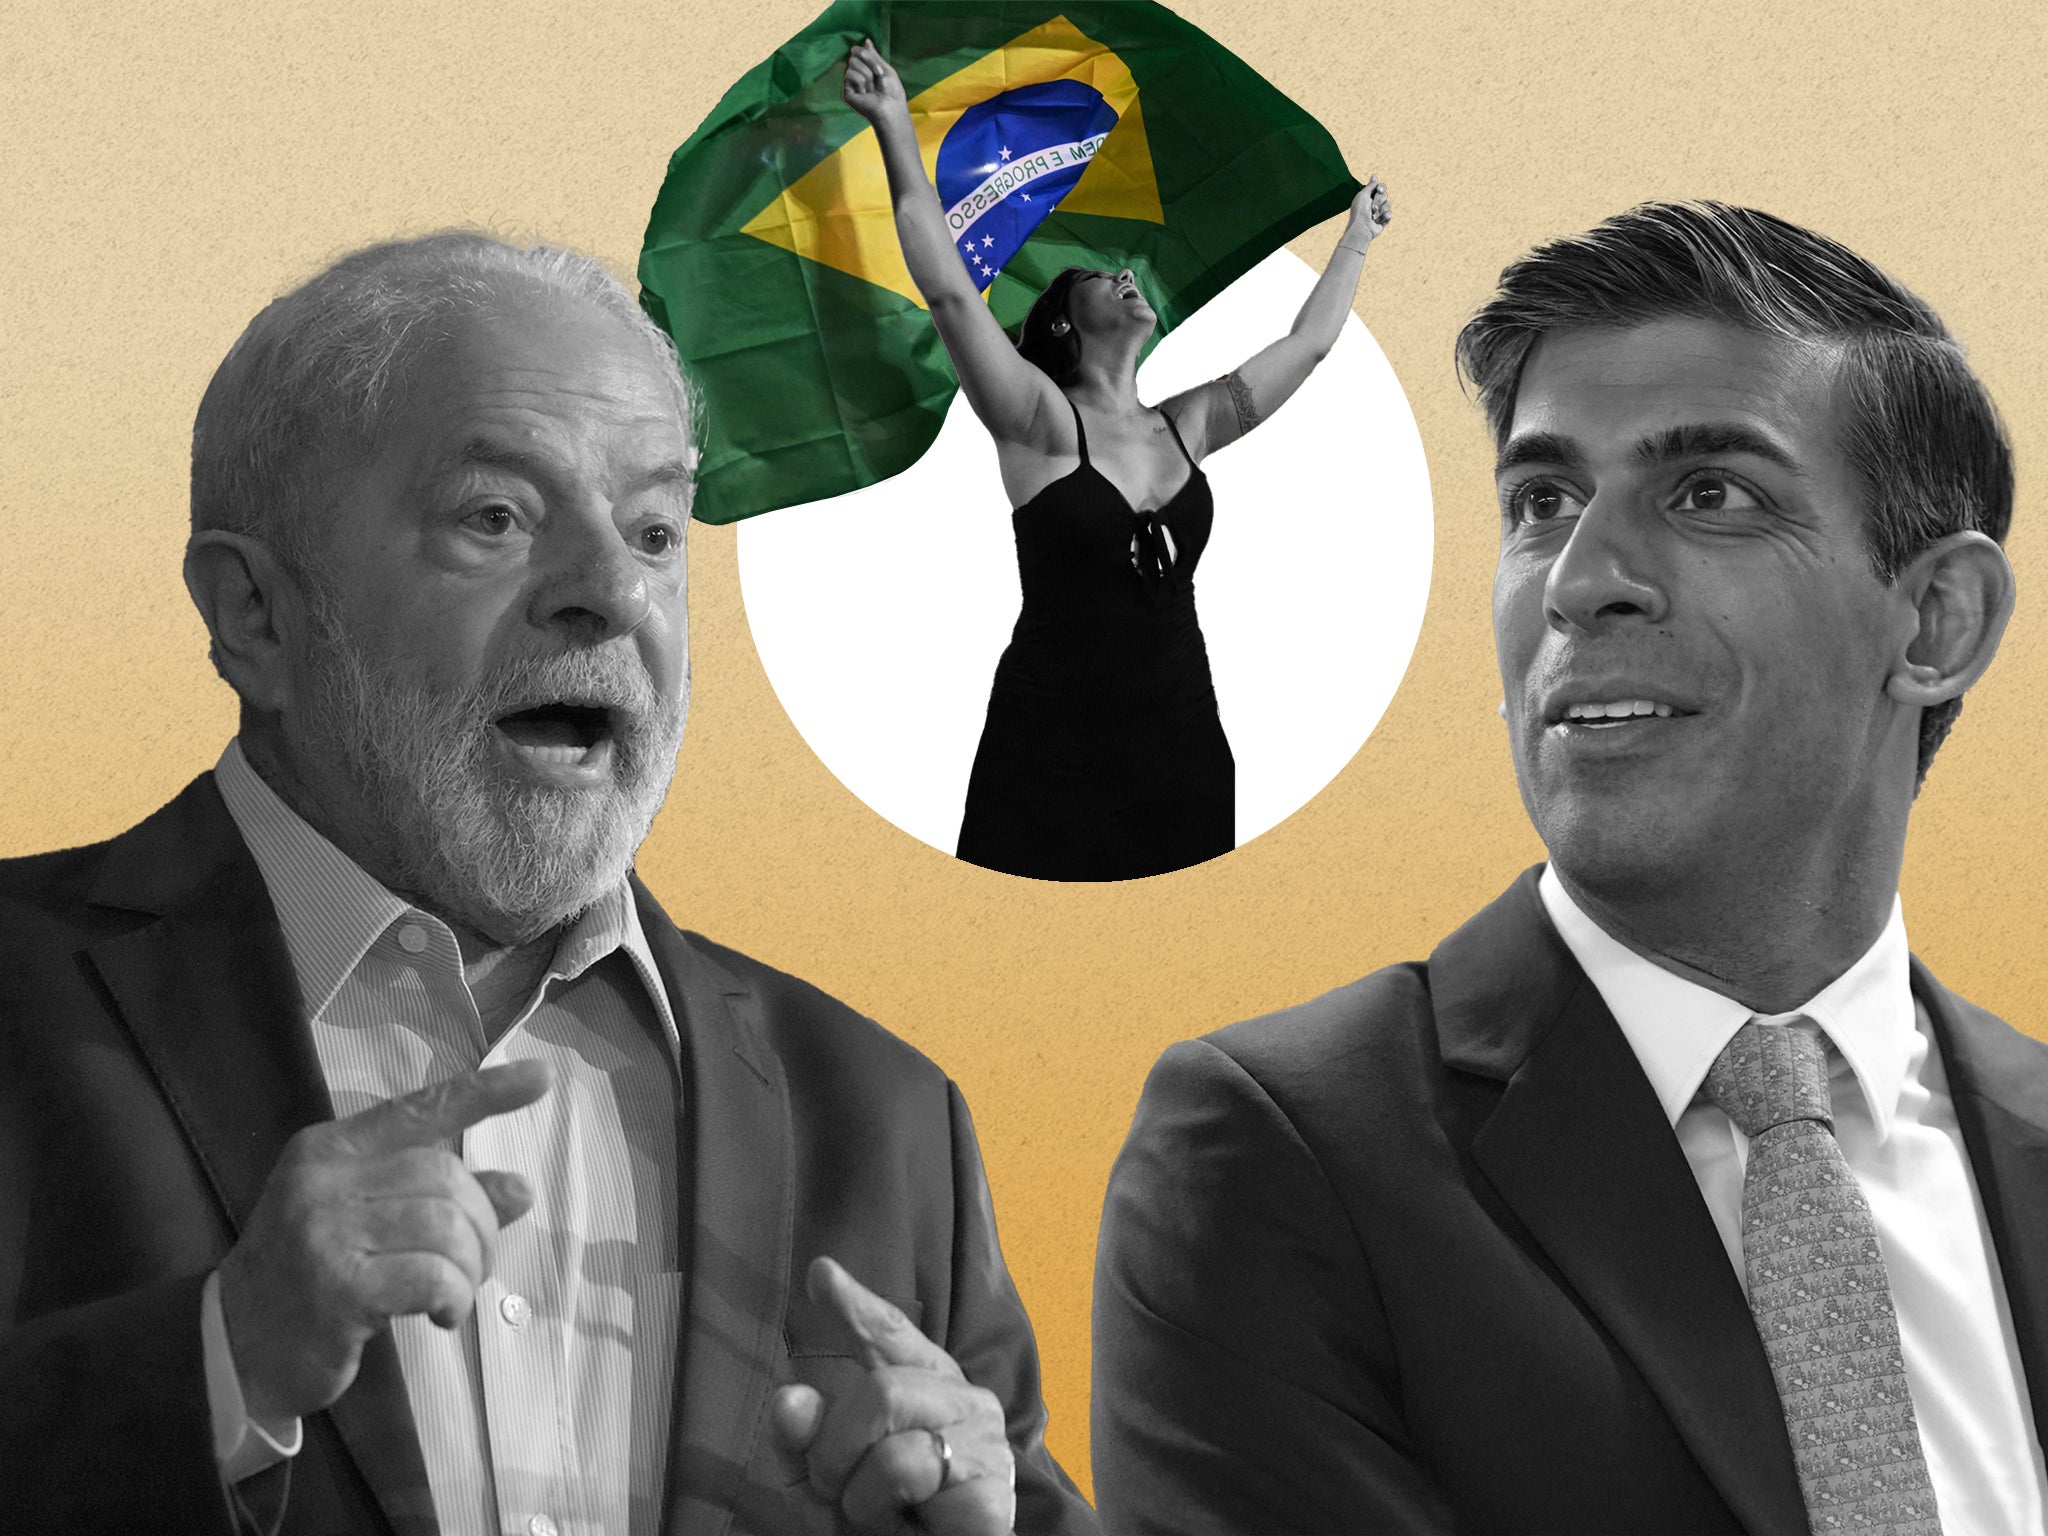 There is surprise among Lula’s team at the time it has taken Sunak to reach out to the president-elect